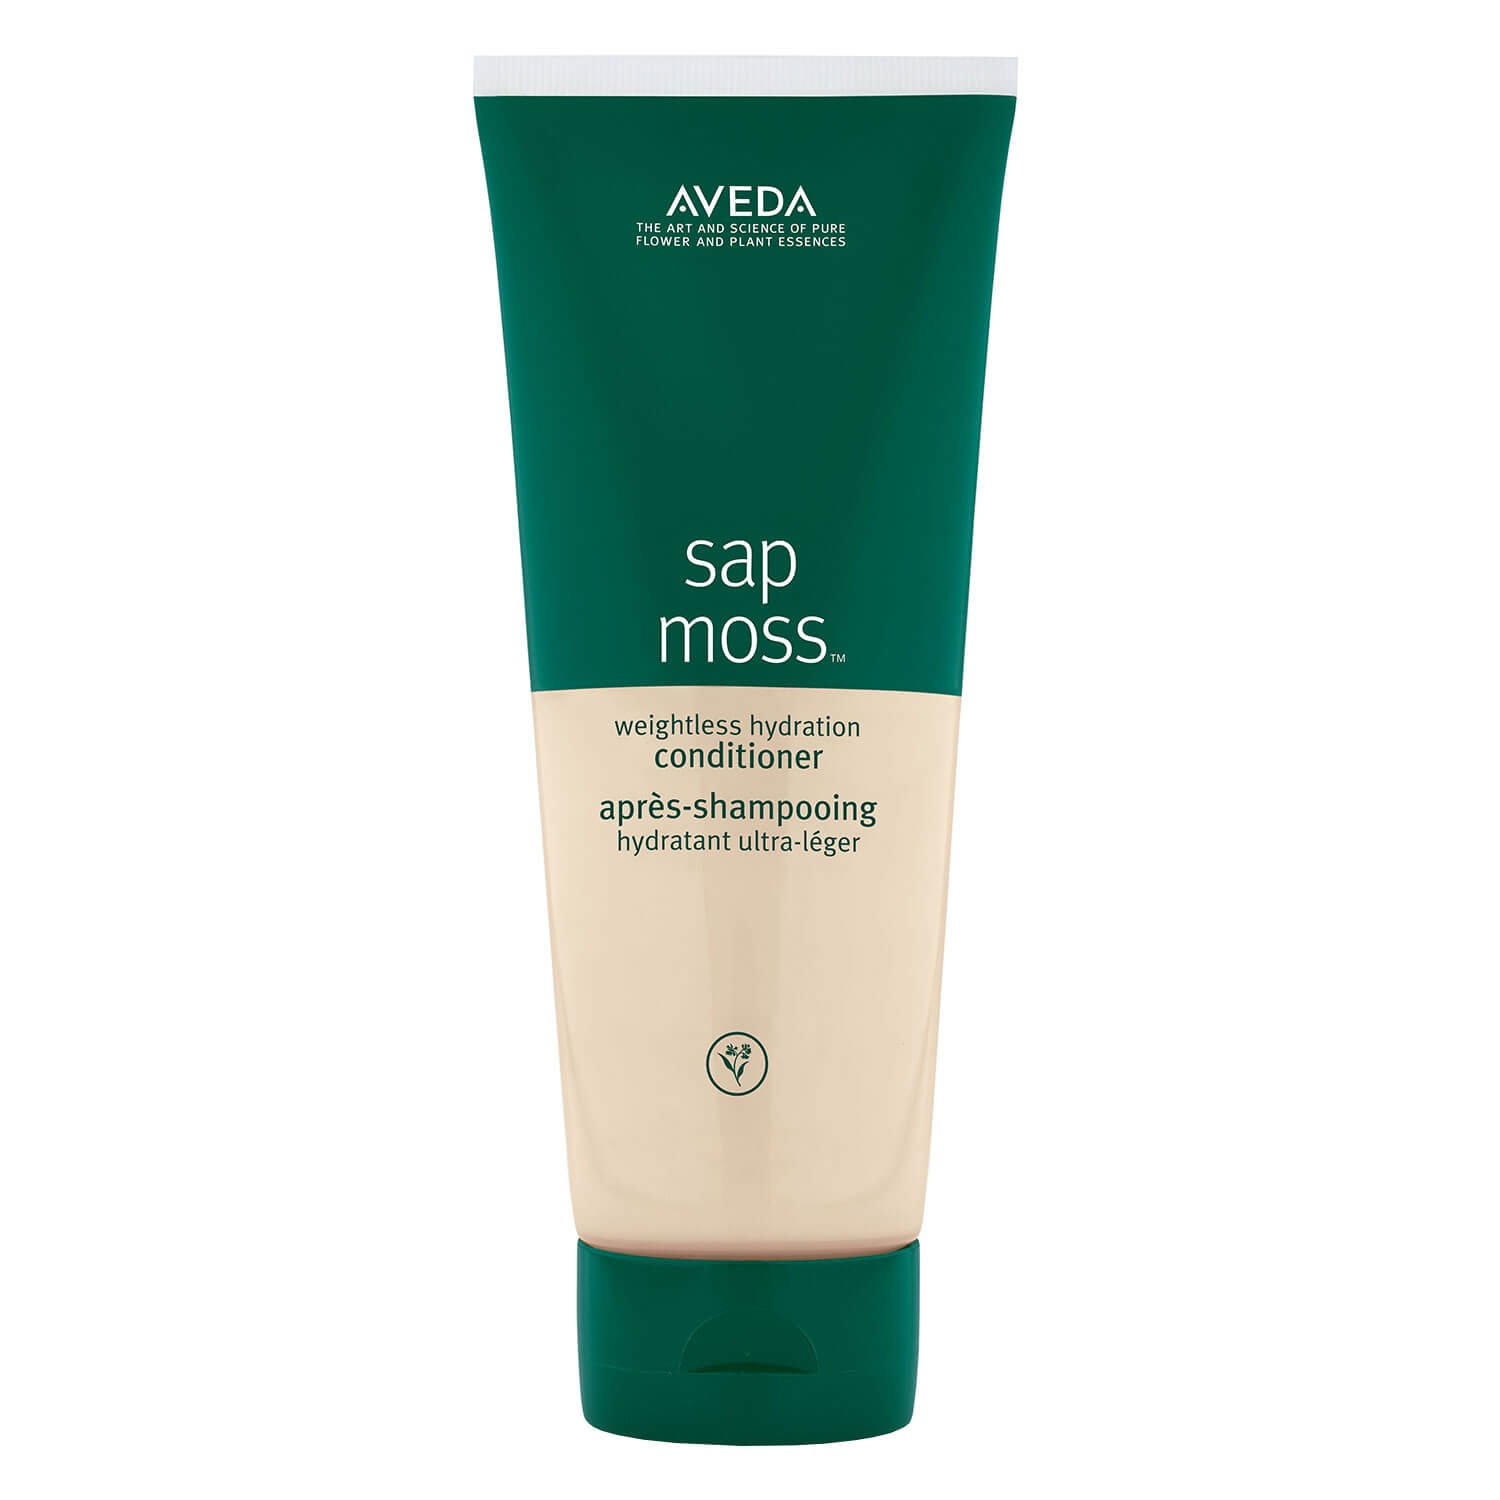 Product image from sap moss - weightless hydration conditioner